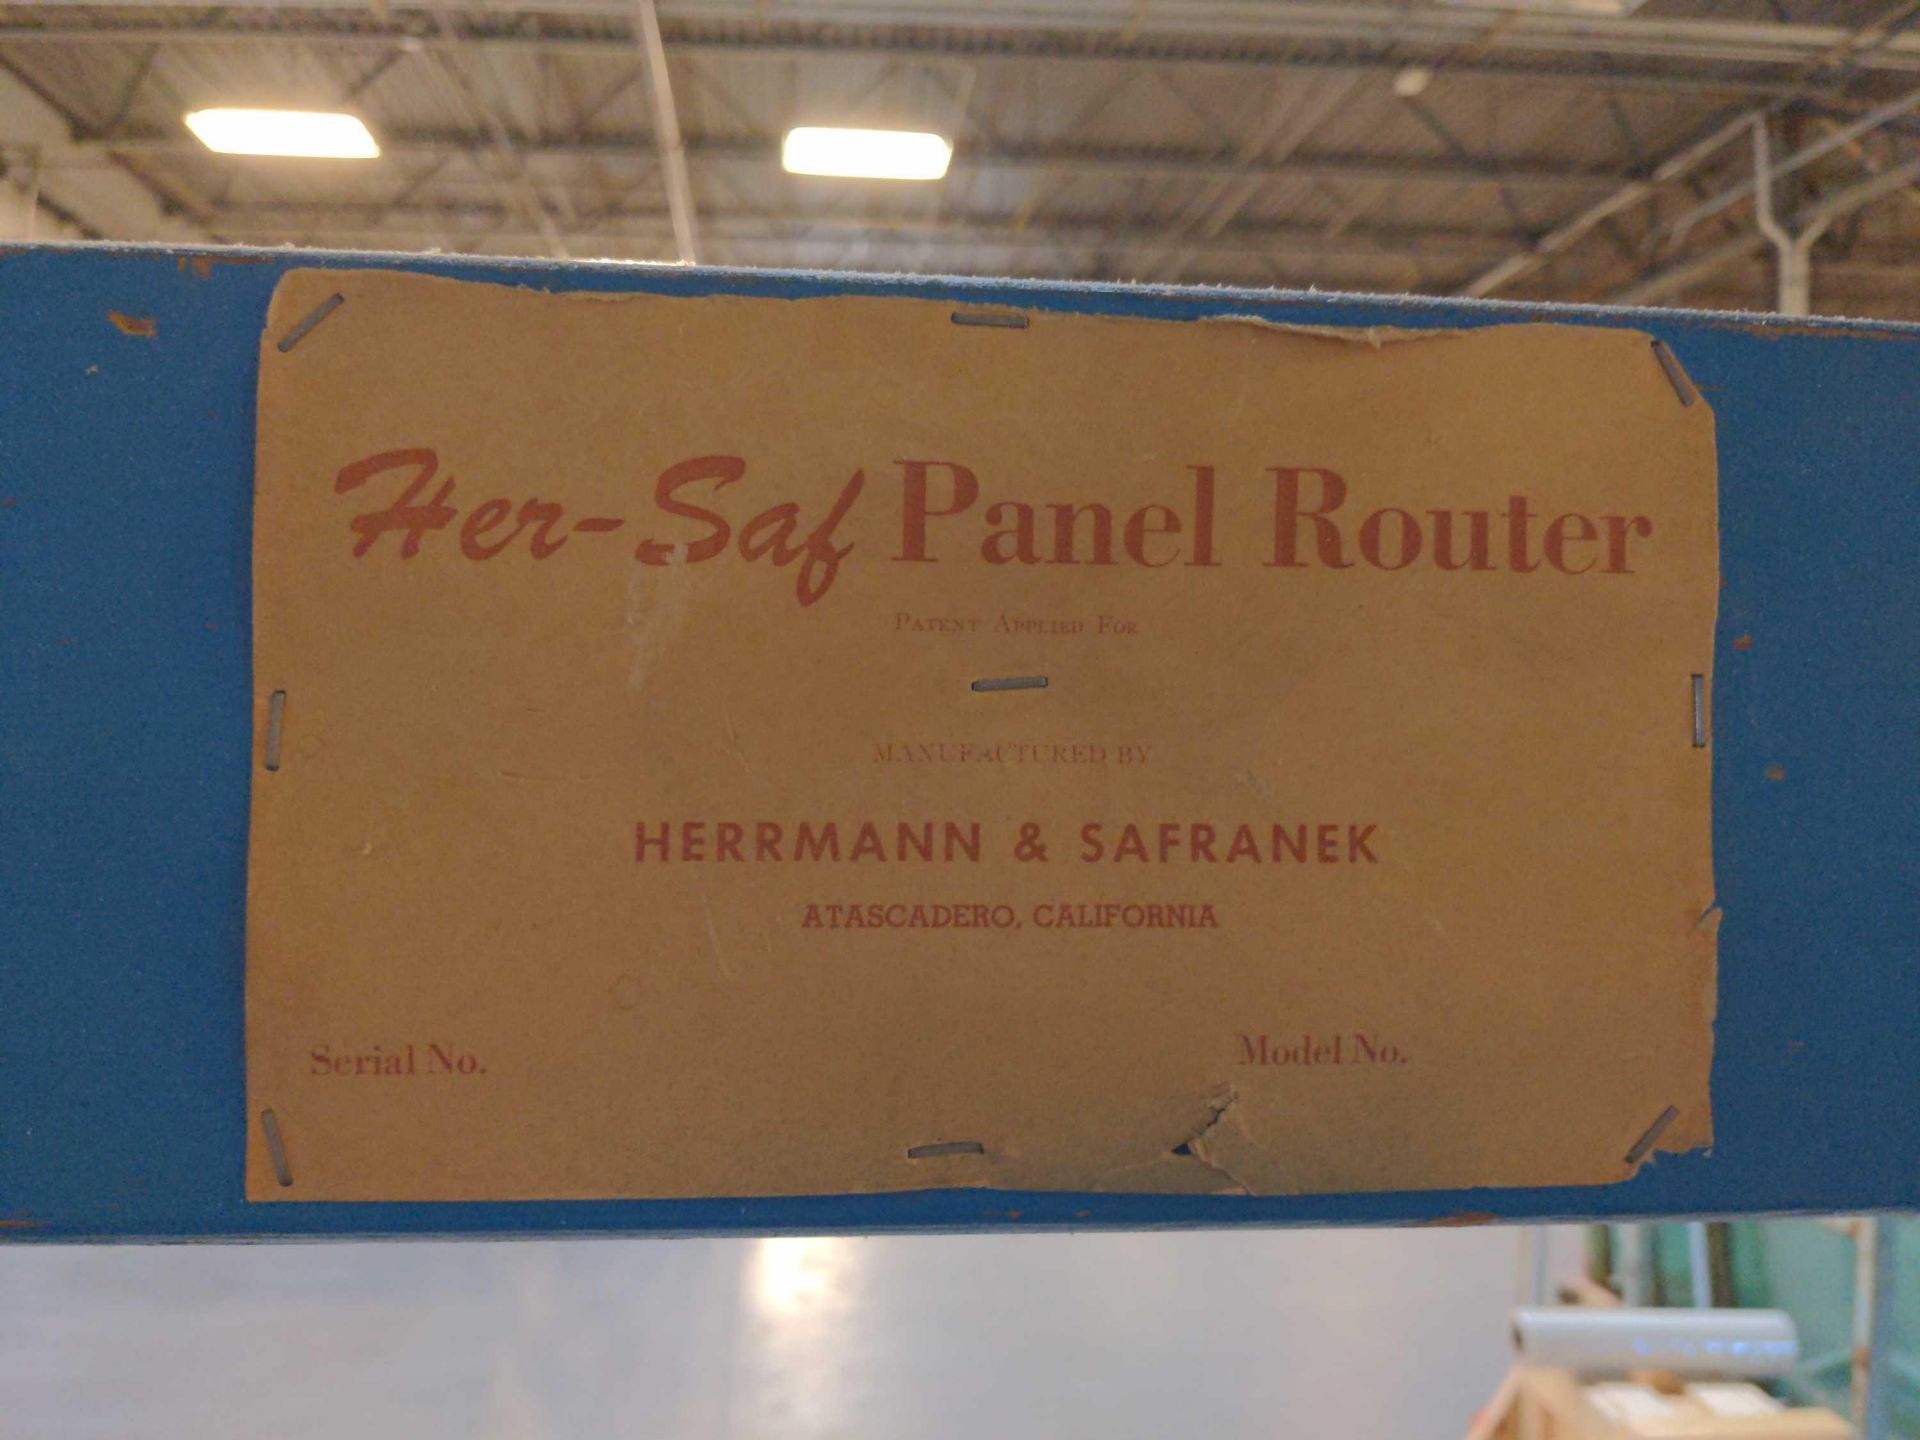 Her-Saf Panel Router - Image 5 of 6